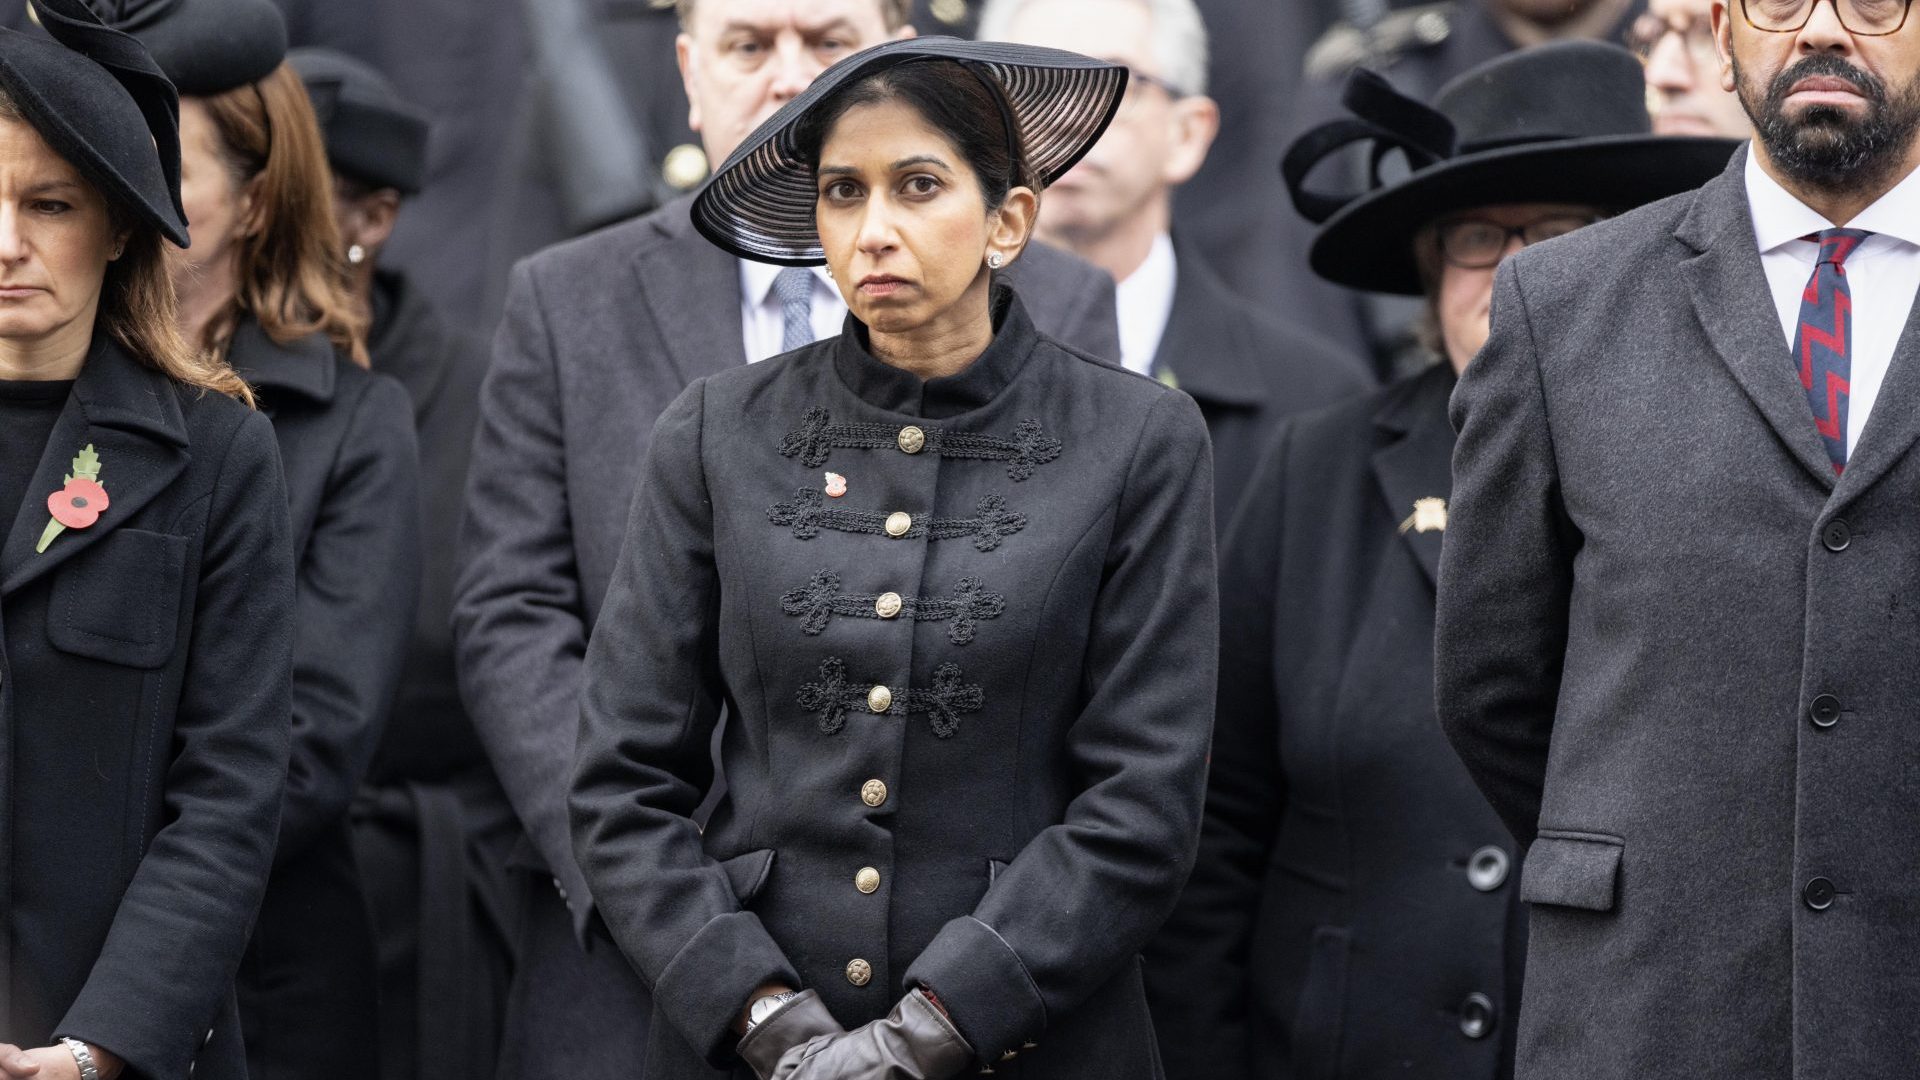 Home Secretary Suella Braverman stands at the Cenotaph in London with her wreath on Remembrance Sunday. Photo: Richard Pohle - WPA Pool/Getty Images